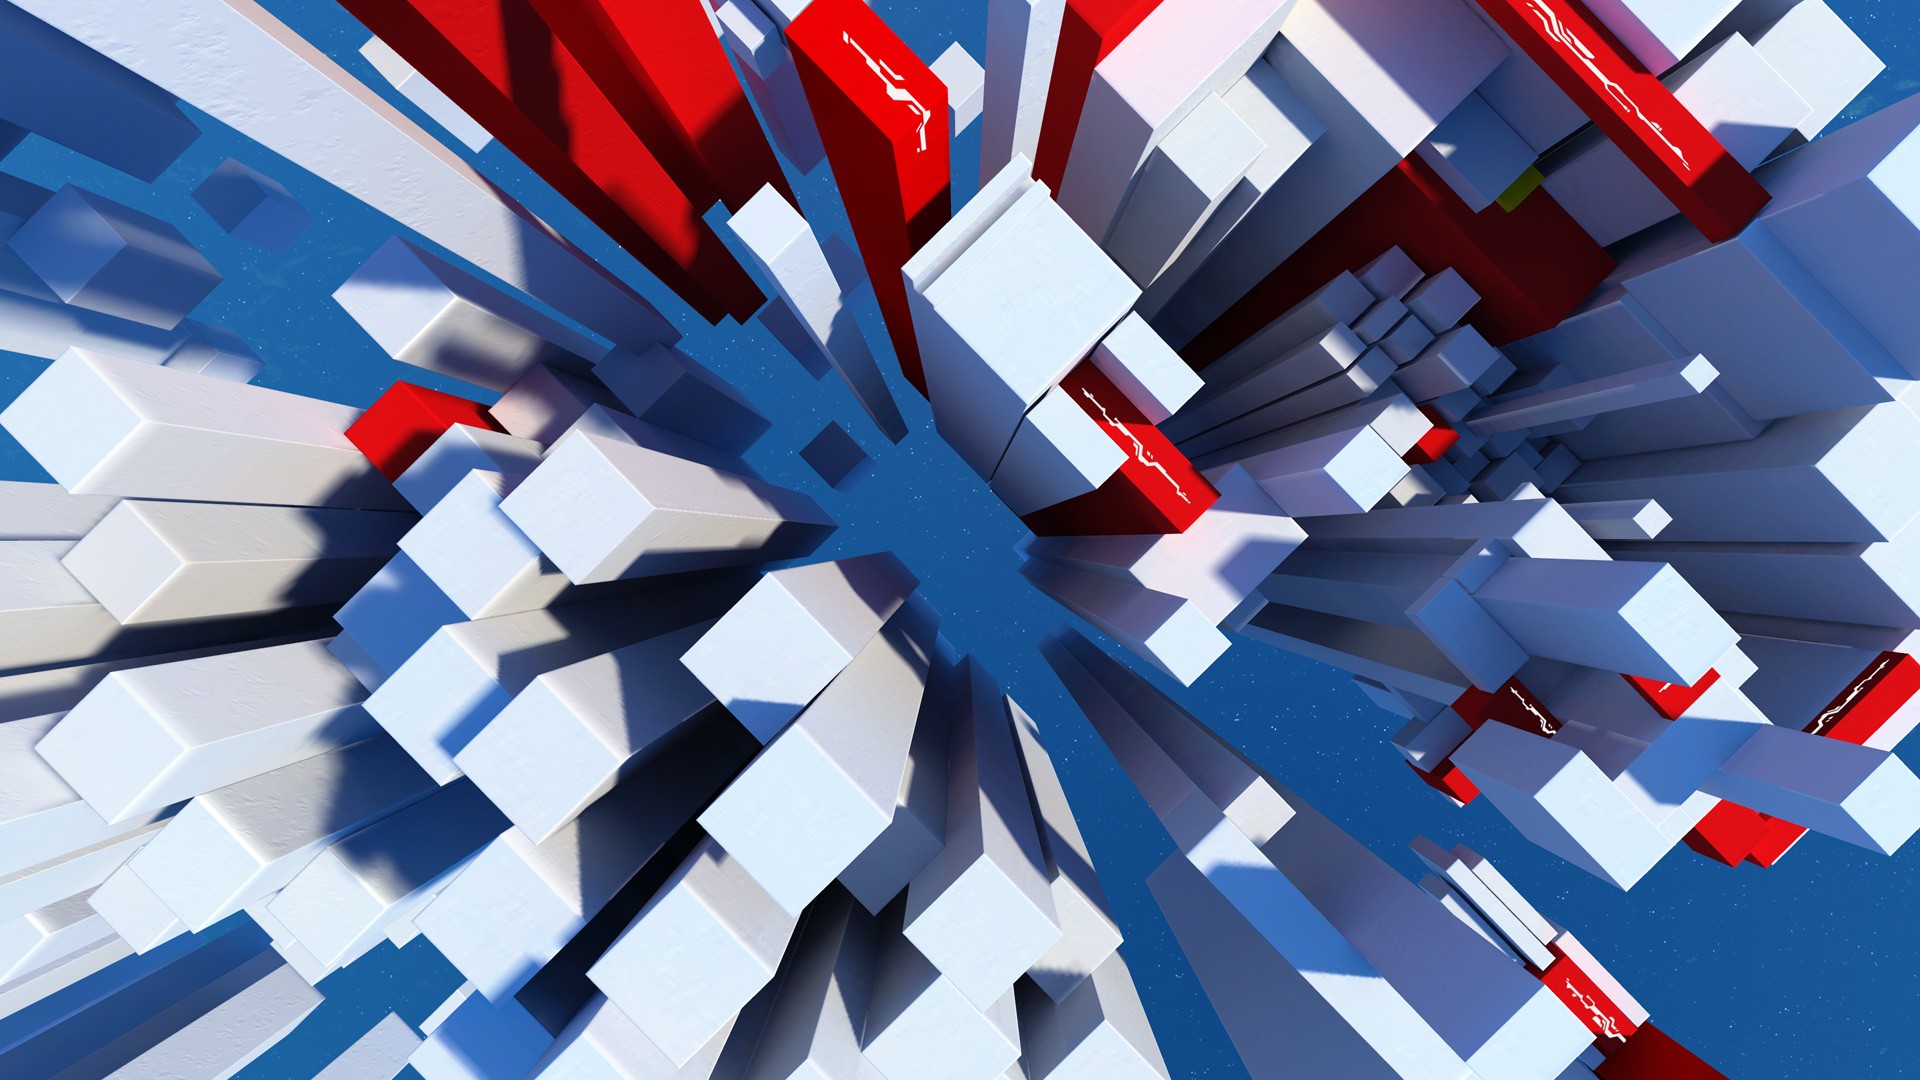 Download mobile wallpaper Mirror's Edge, Video Game for free.